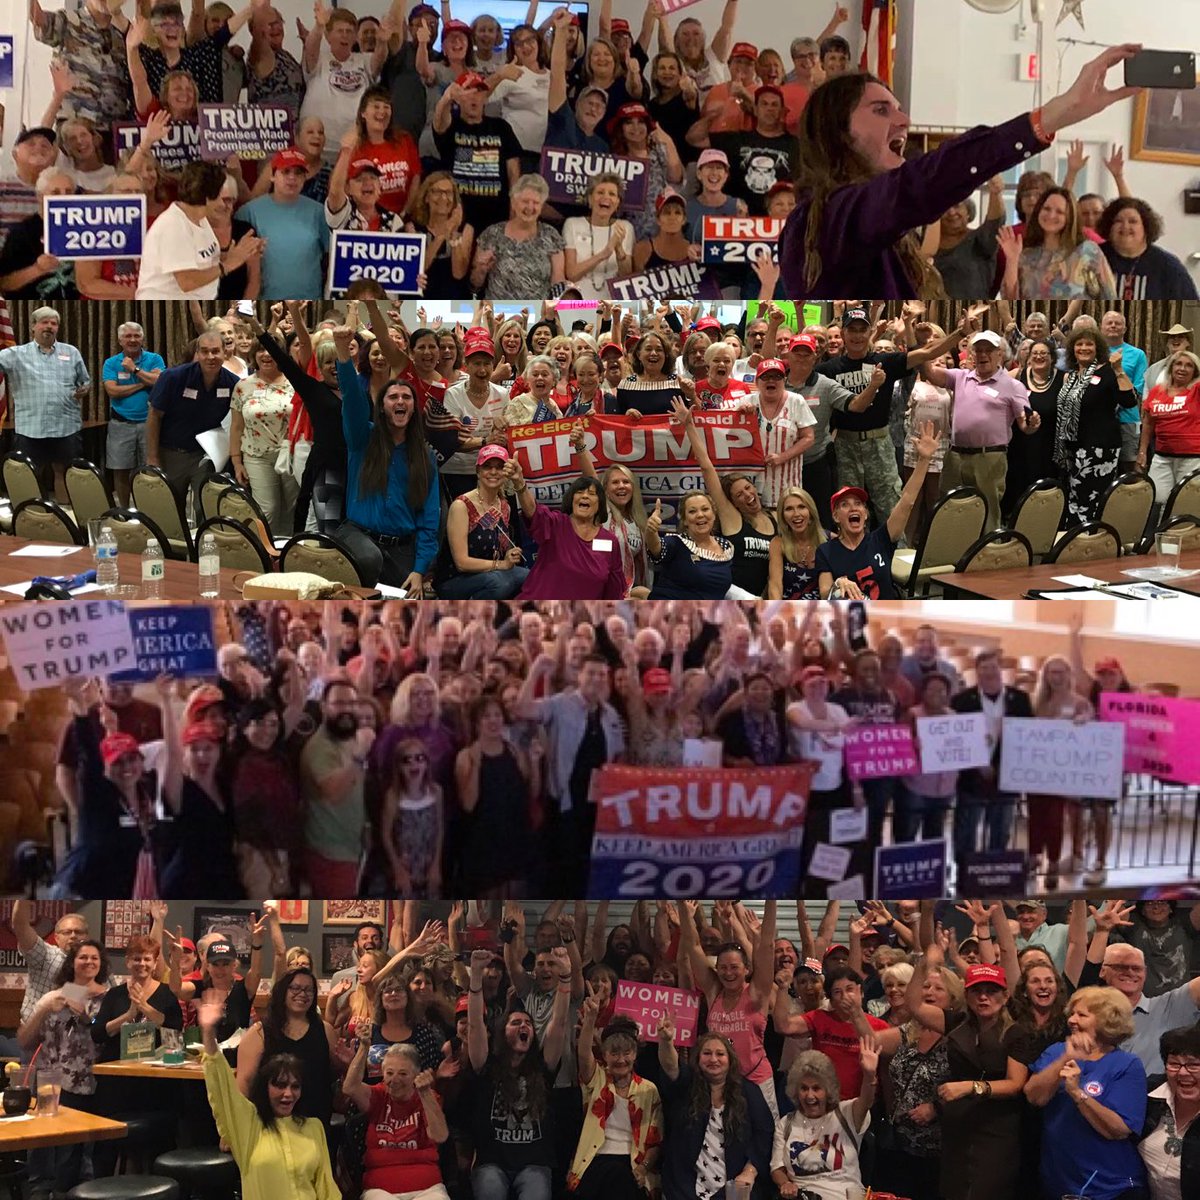 Thank you to everyone who made this Florida trip such a huge success. We did 4 trainings in 4 cities in 4 days, teaching 420 volunteers how to register new Republican voters! #MuellerHearings